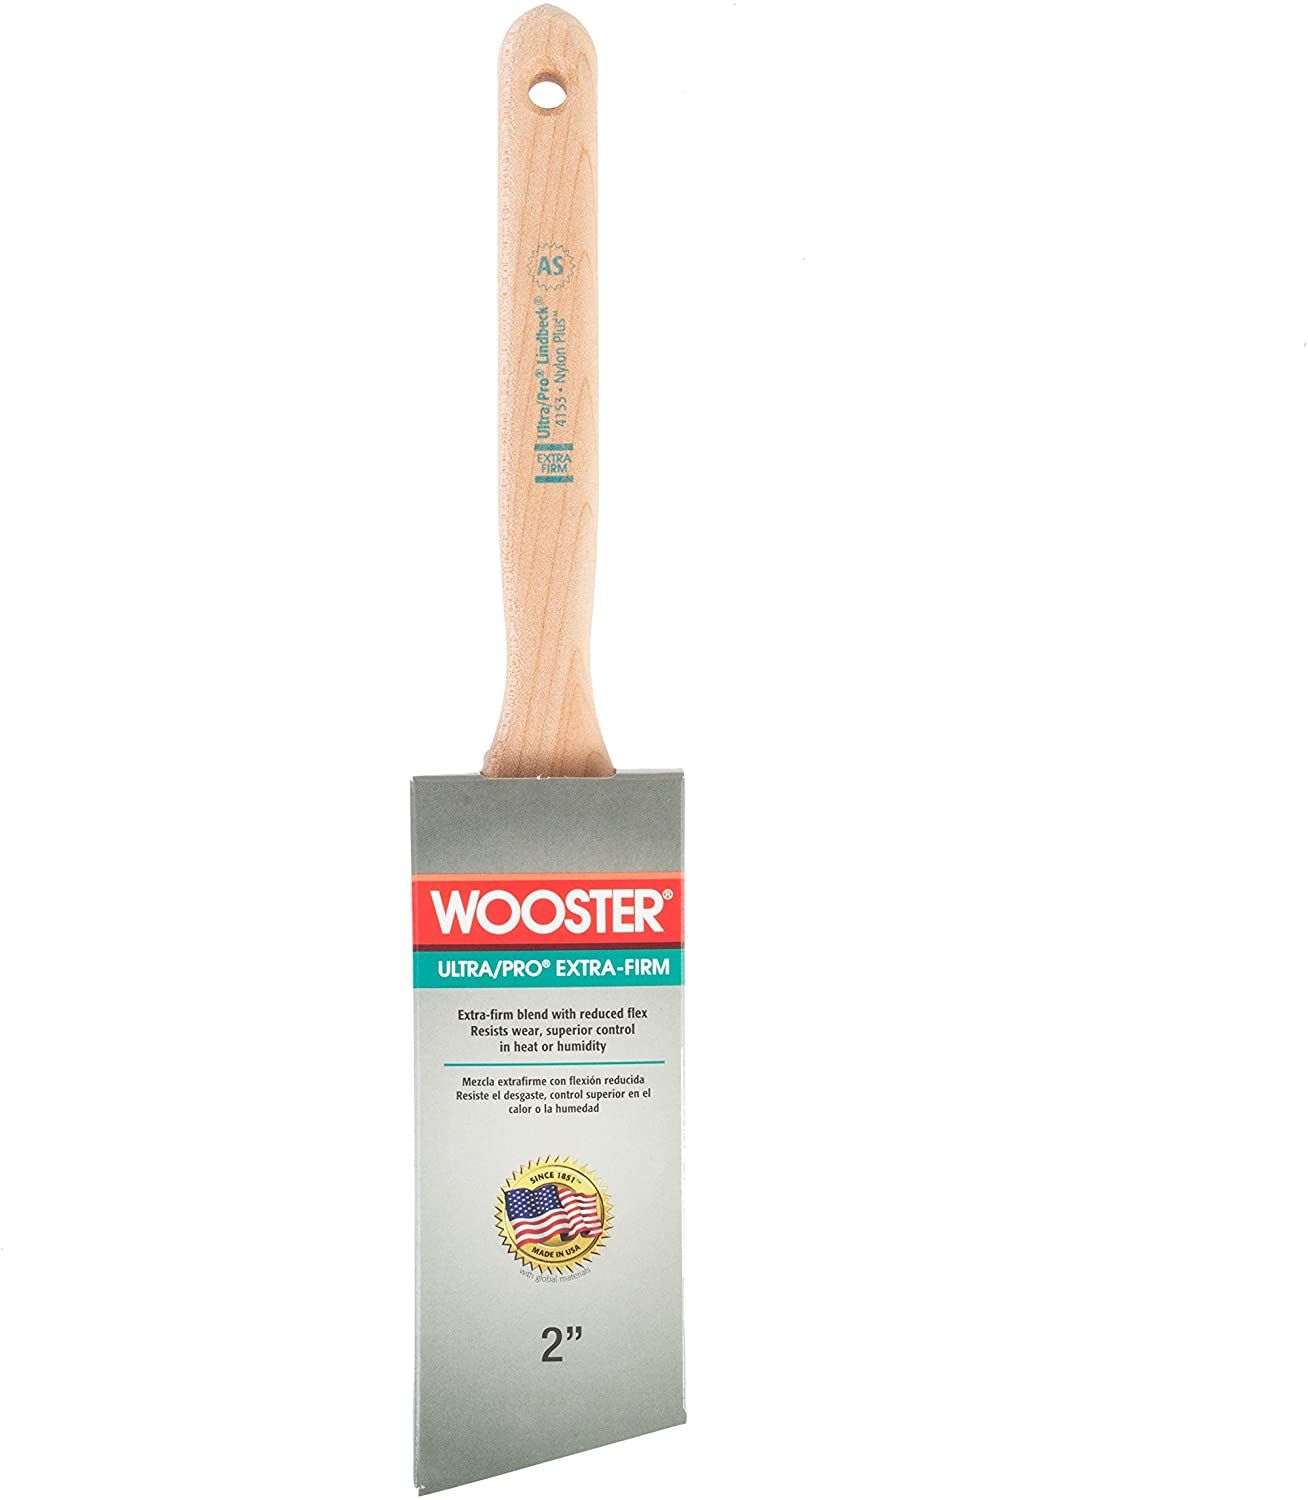 Wooster Ultra/Pro Extra-Firm Lindbeck brush